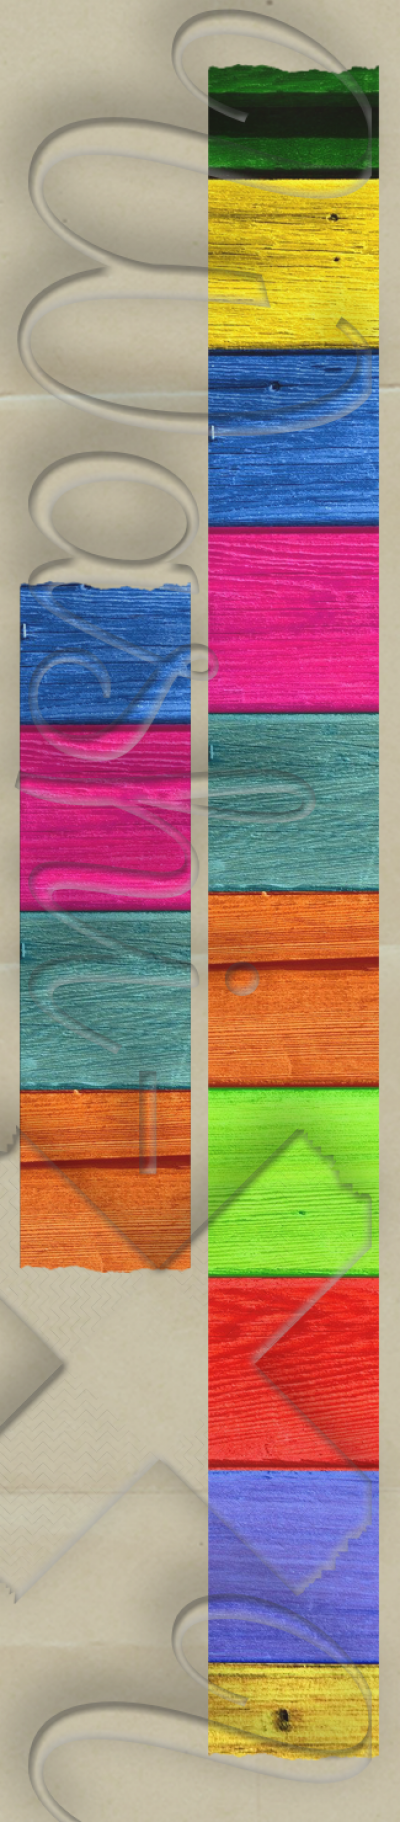 Colorful wood deck patterned washi tape